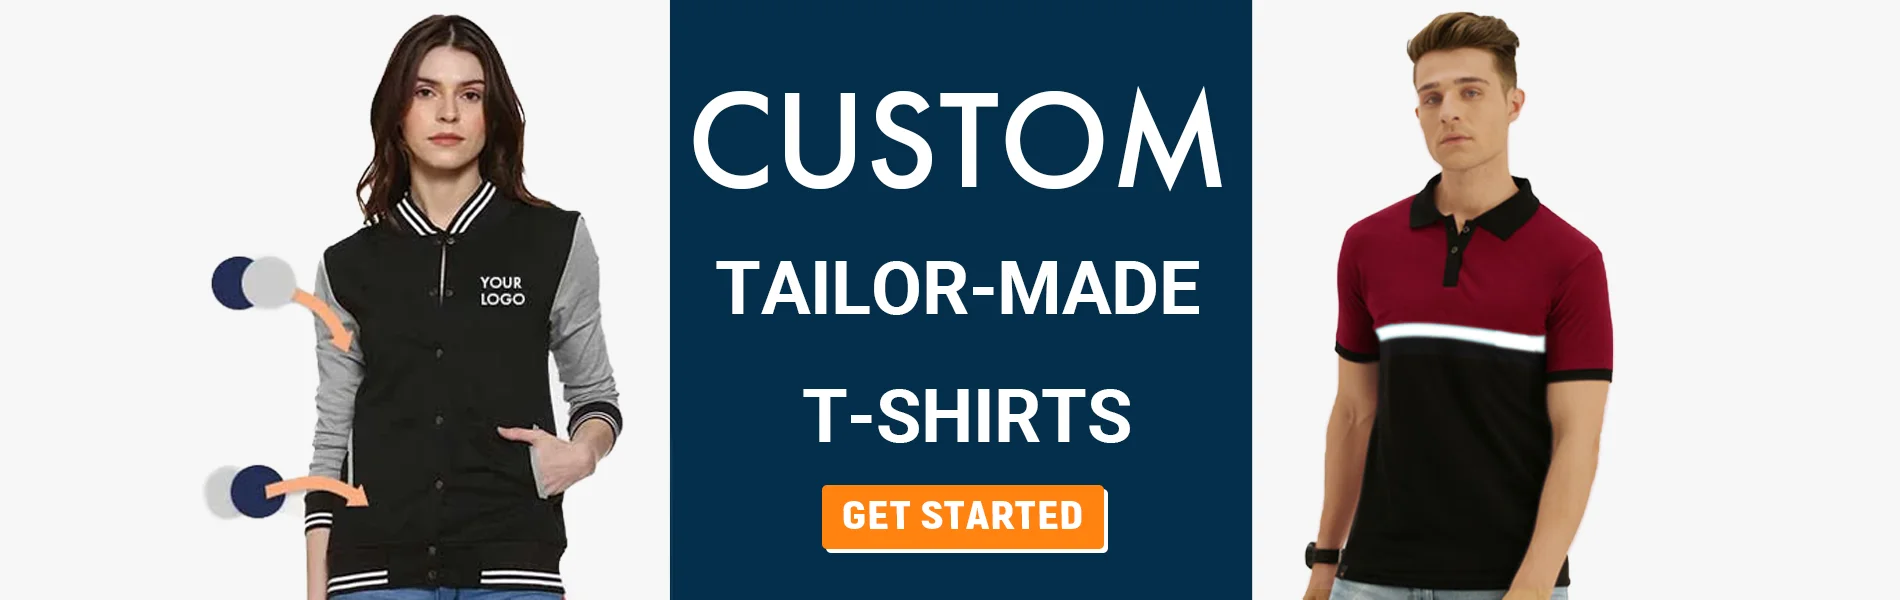 custom tailormade t-shirts indore